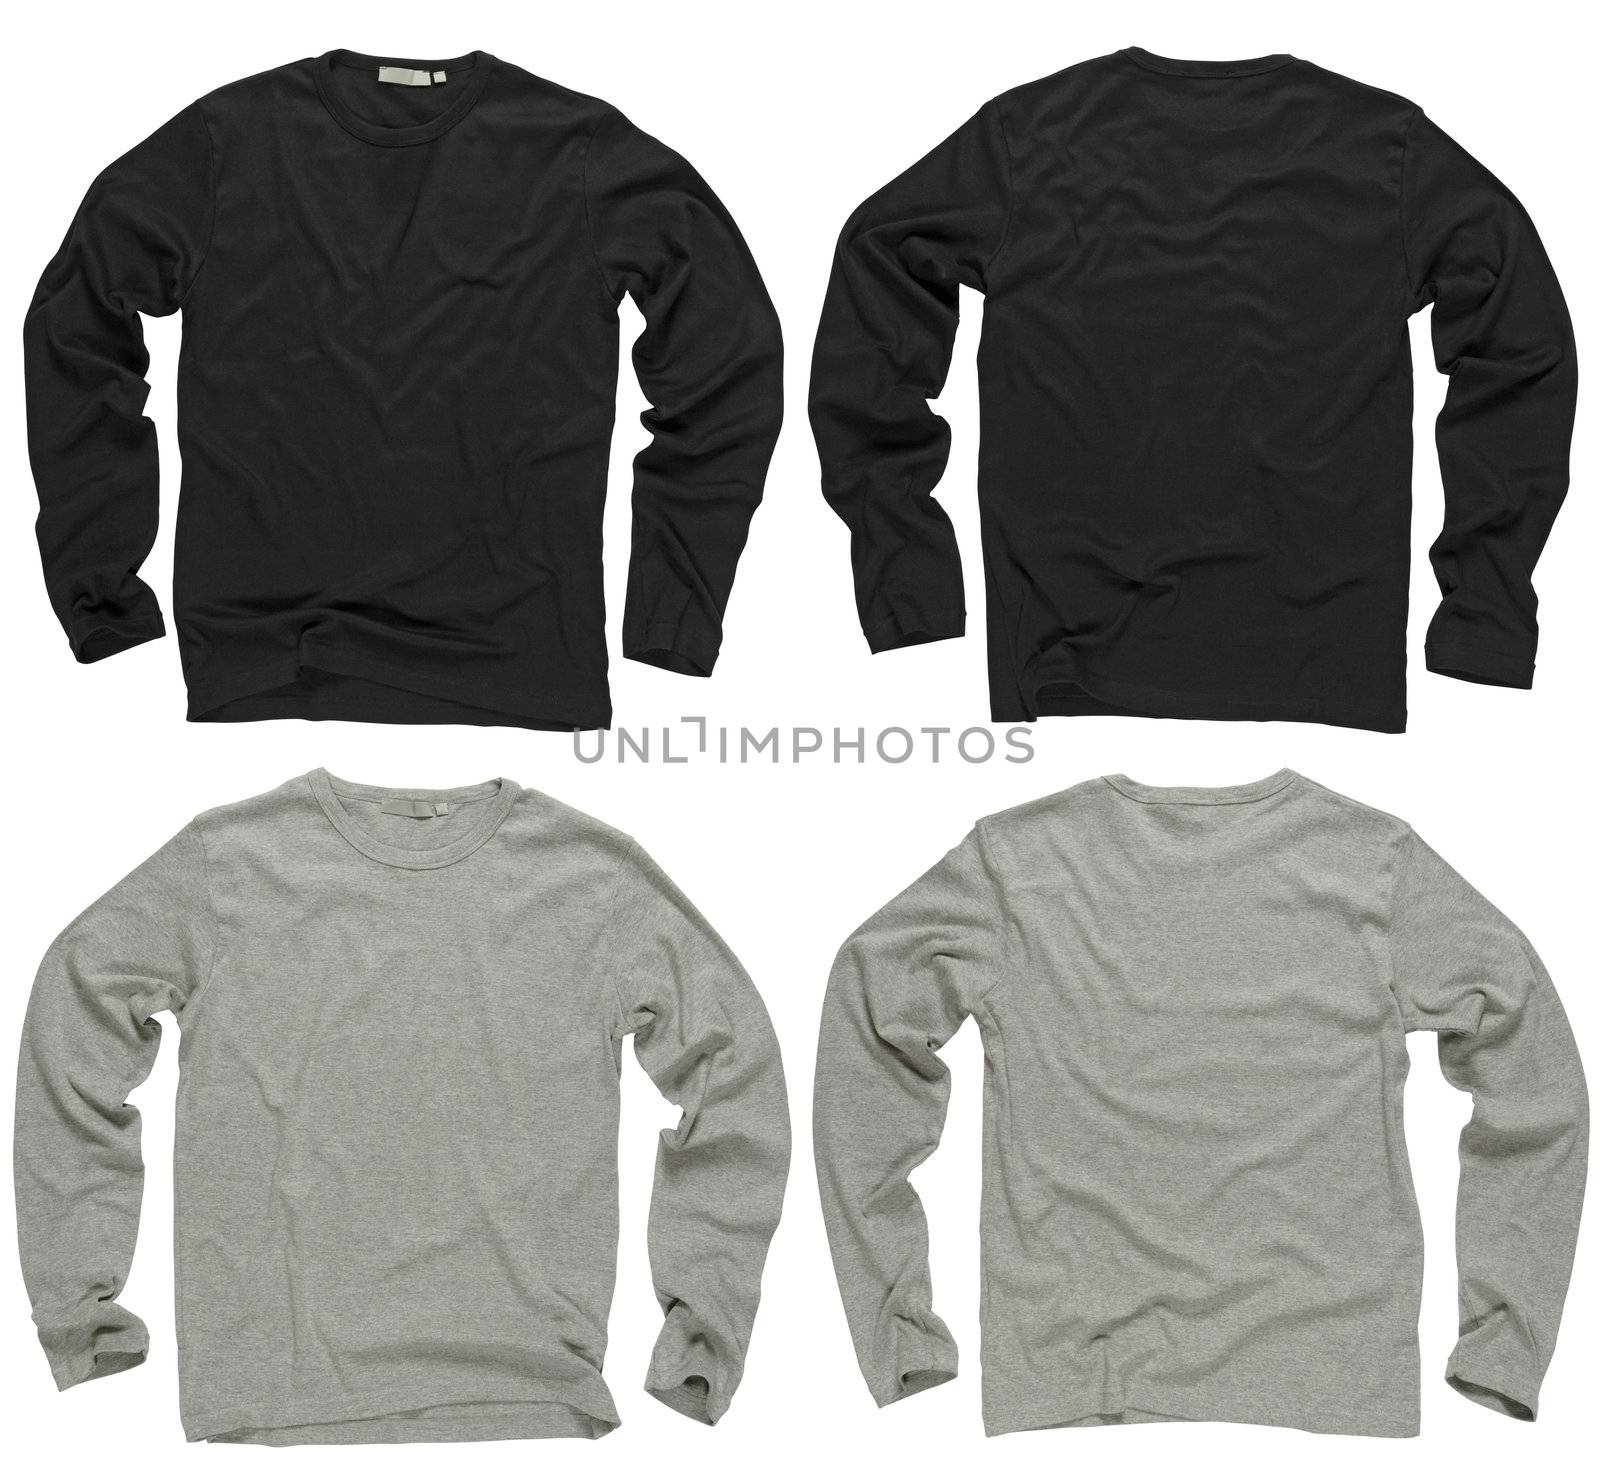 Photograph of two wrinkled blank black and gray long sleeve shirts, fronts and backs.  Clipping path included.  Ready for your design or logo.